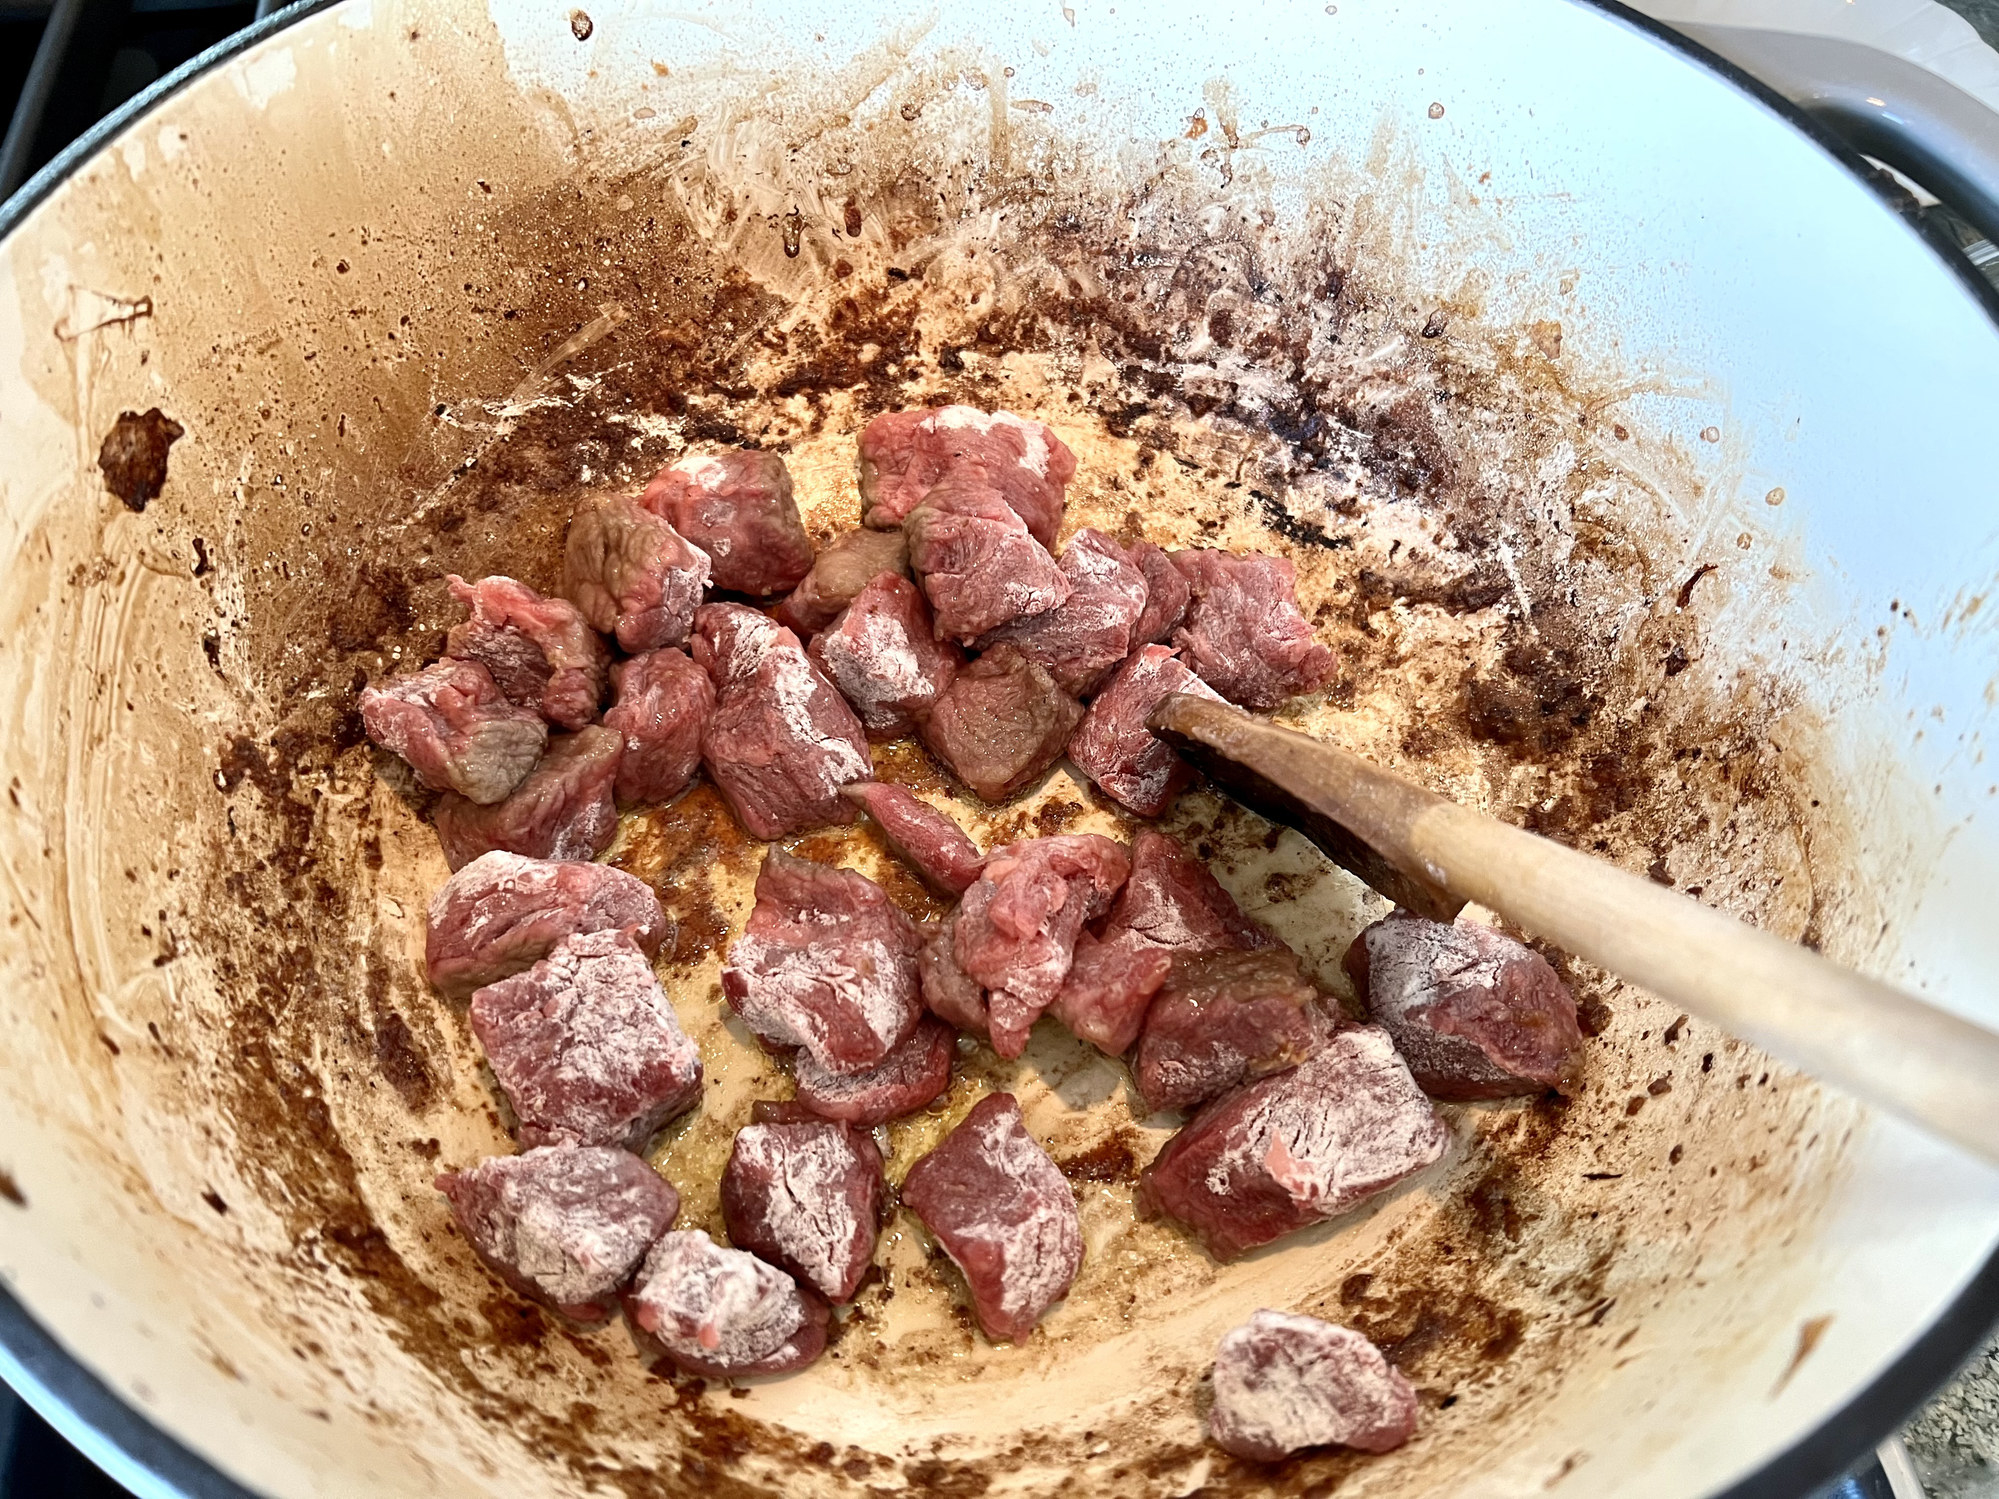 Browning chunks of meat in a Dutch oven